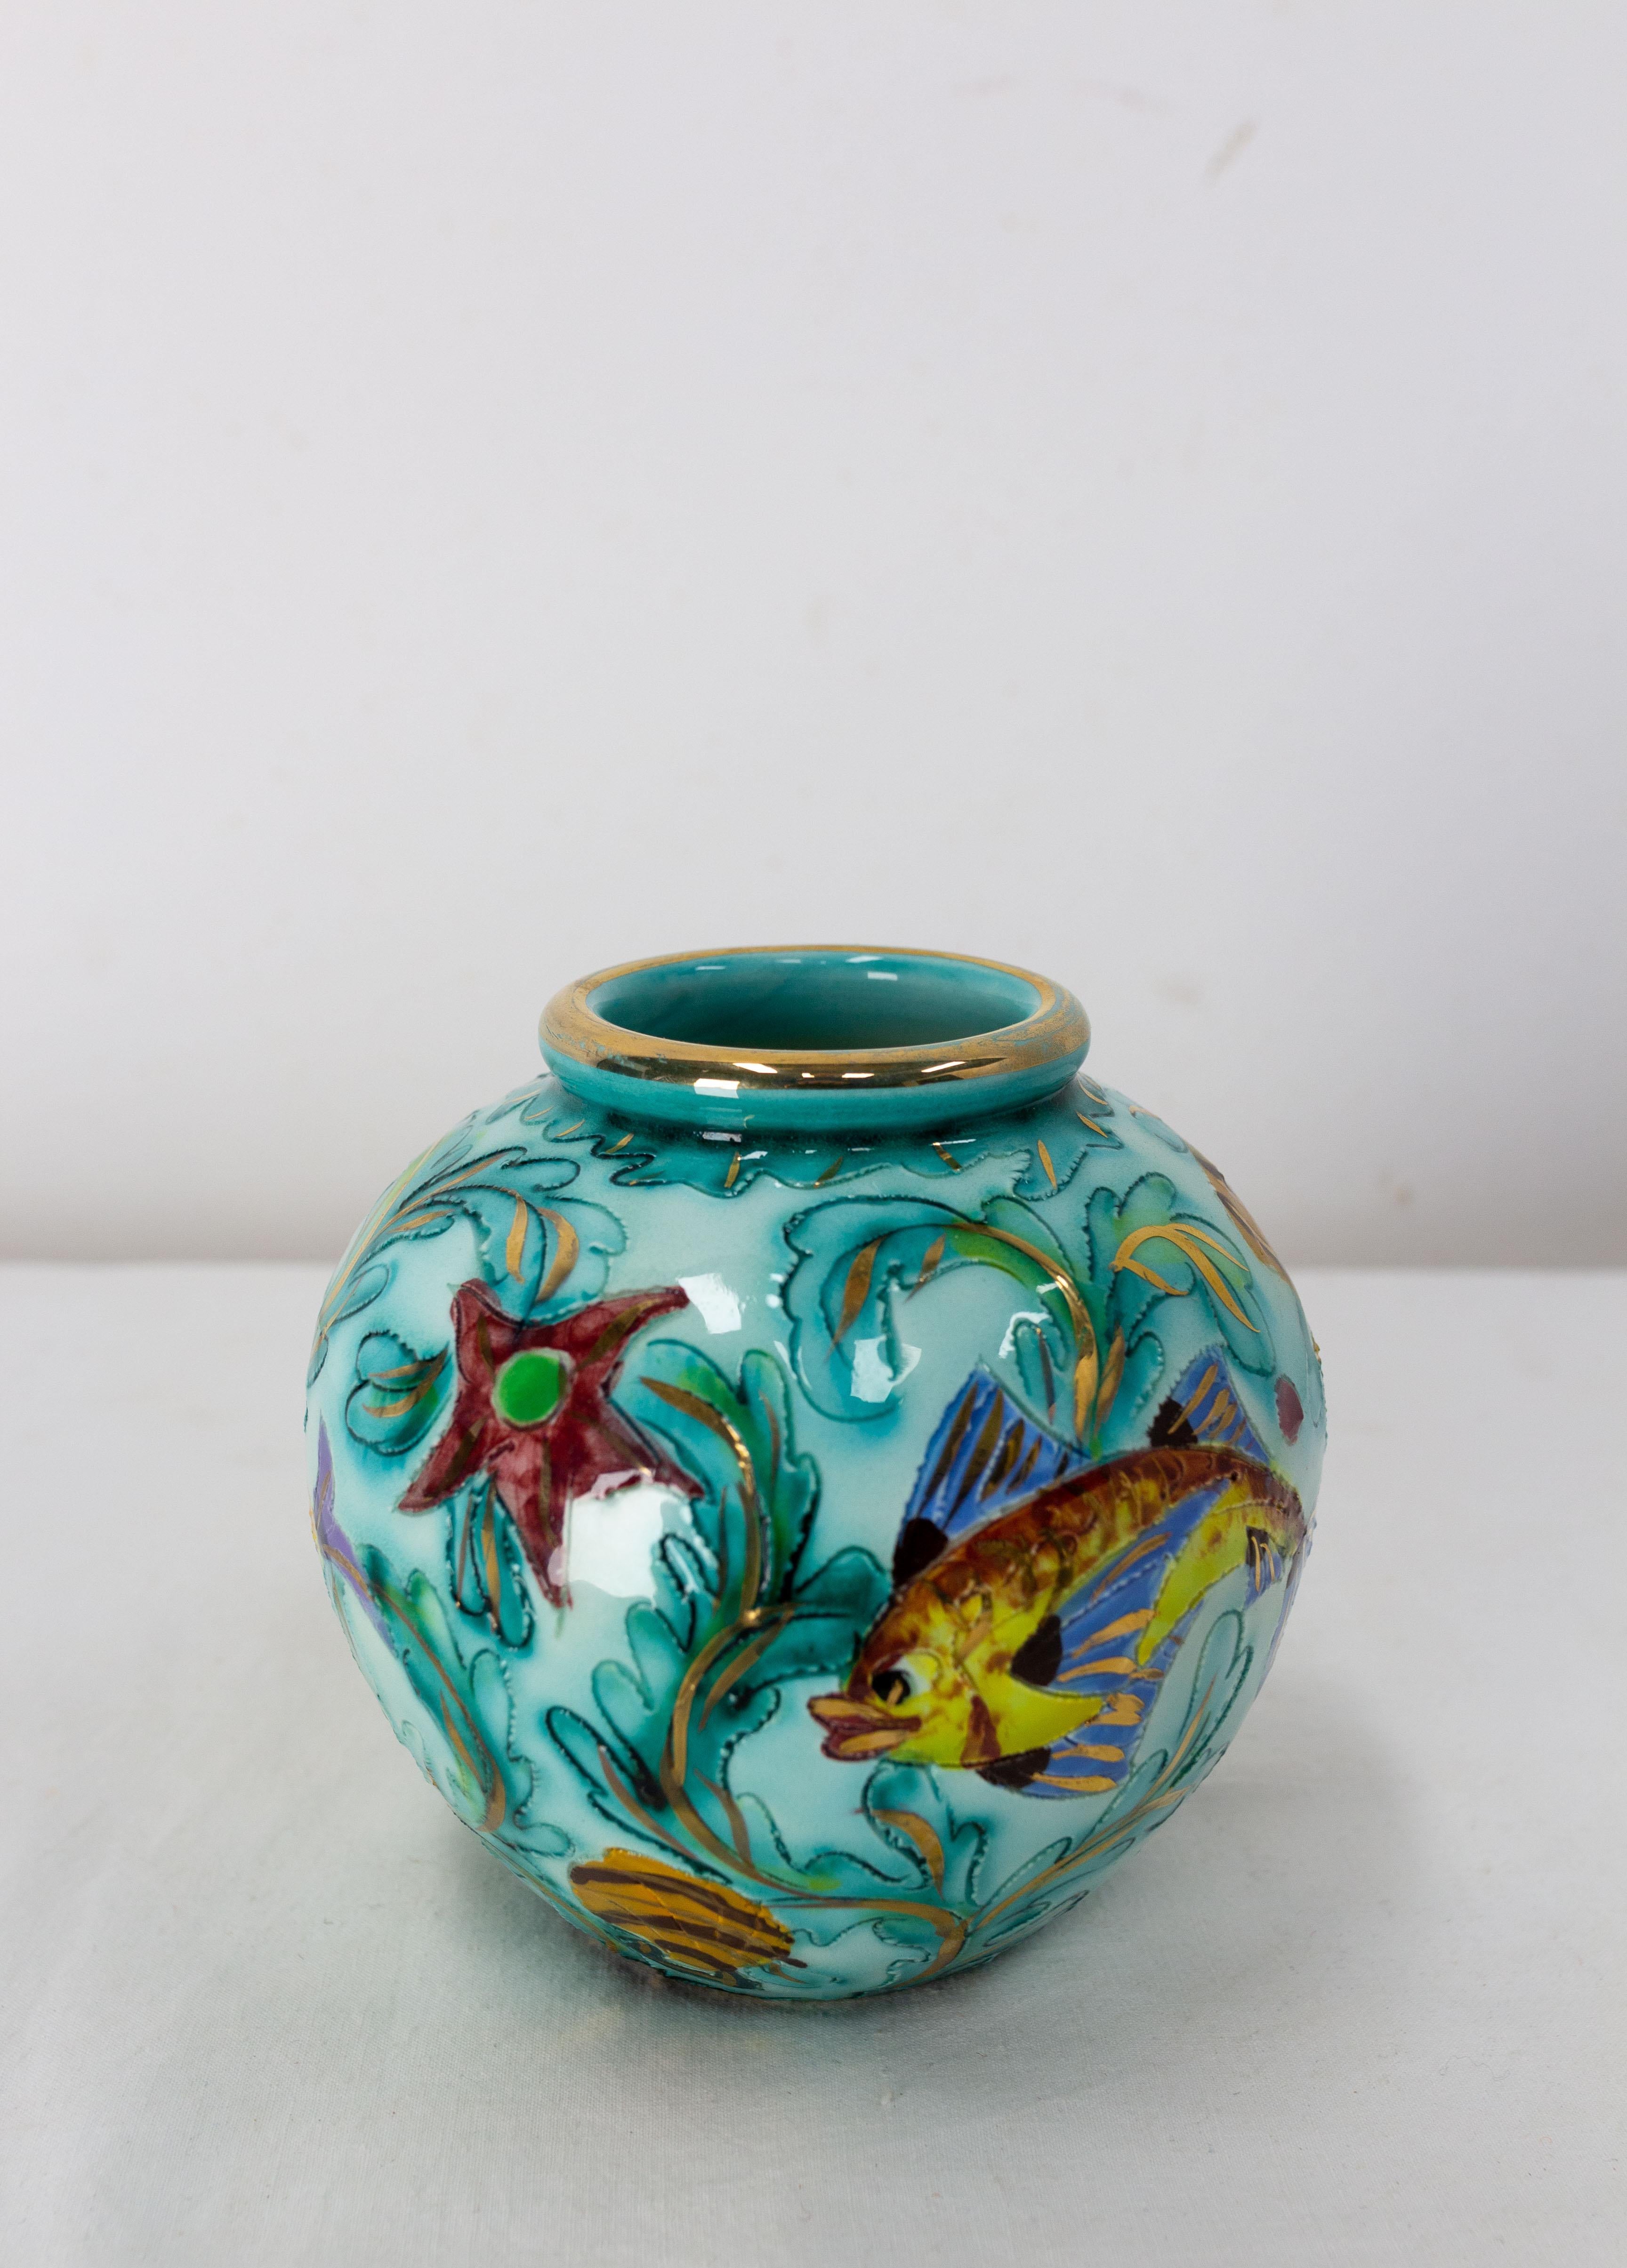 This mid-century vase represents fishes and seaweeds on the seabed.
Very colorated.
Good vintage condition.

Measures: D12, H12, 0,46 kg.